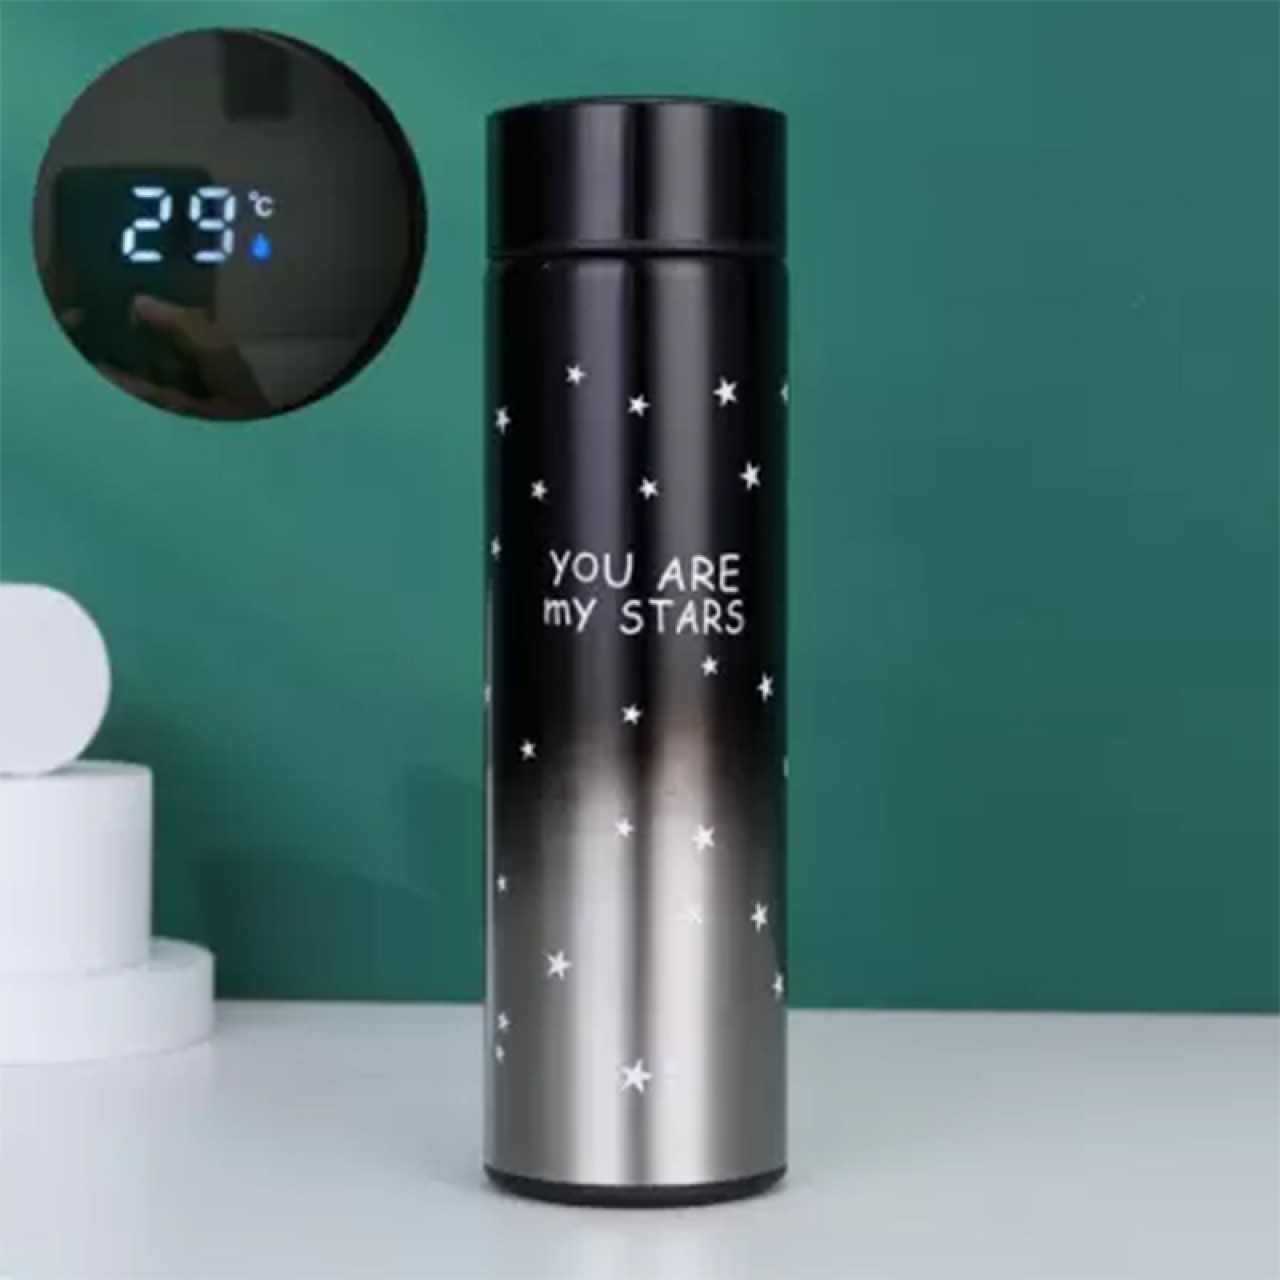 Your Are My Star Temperature Bottle With Smart Display